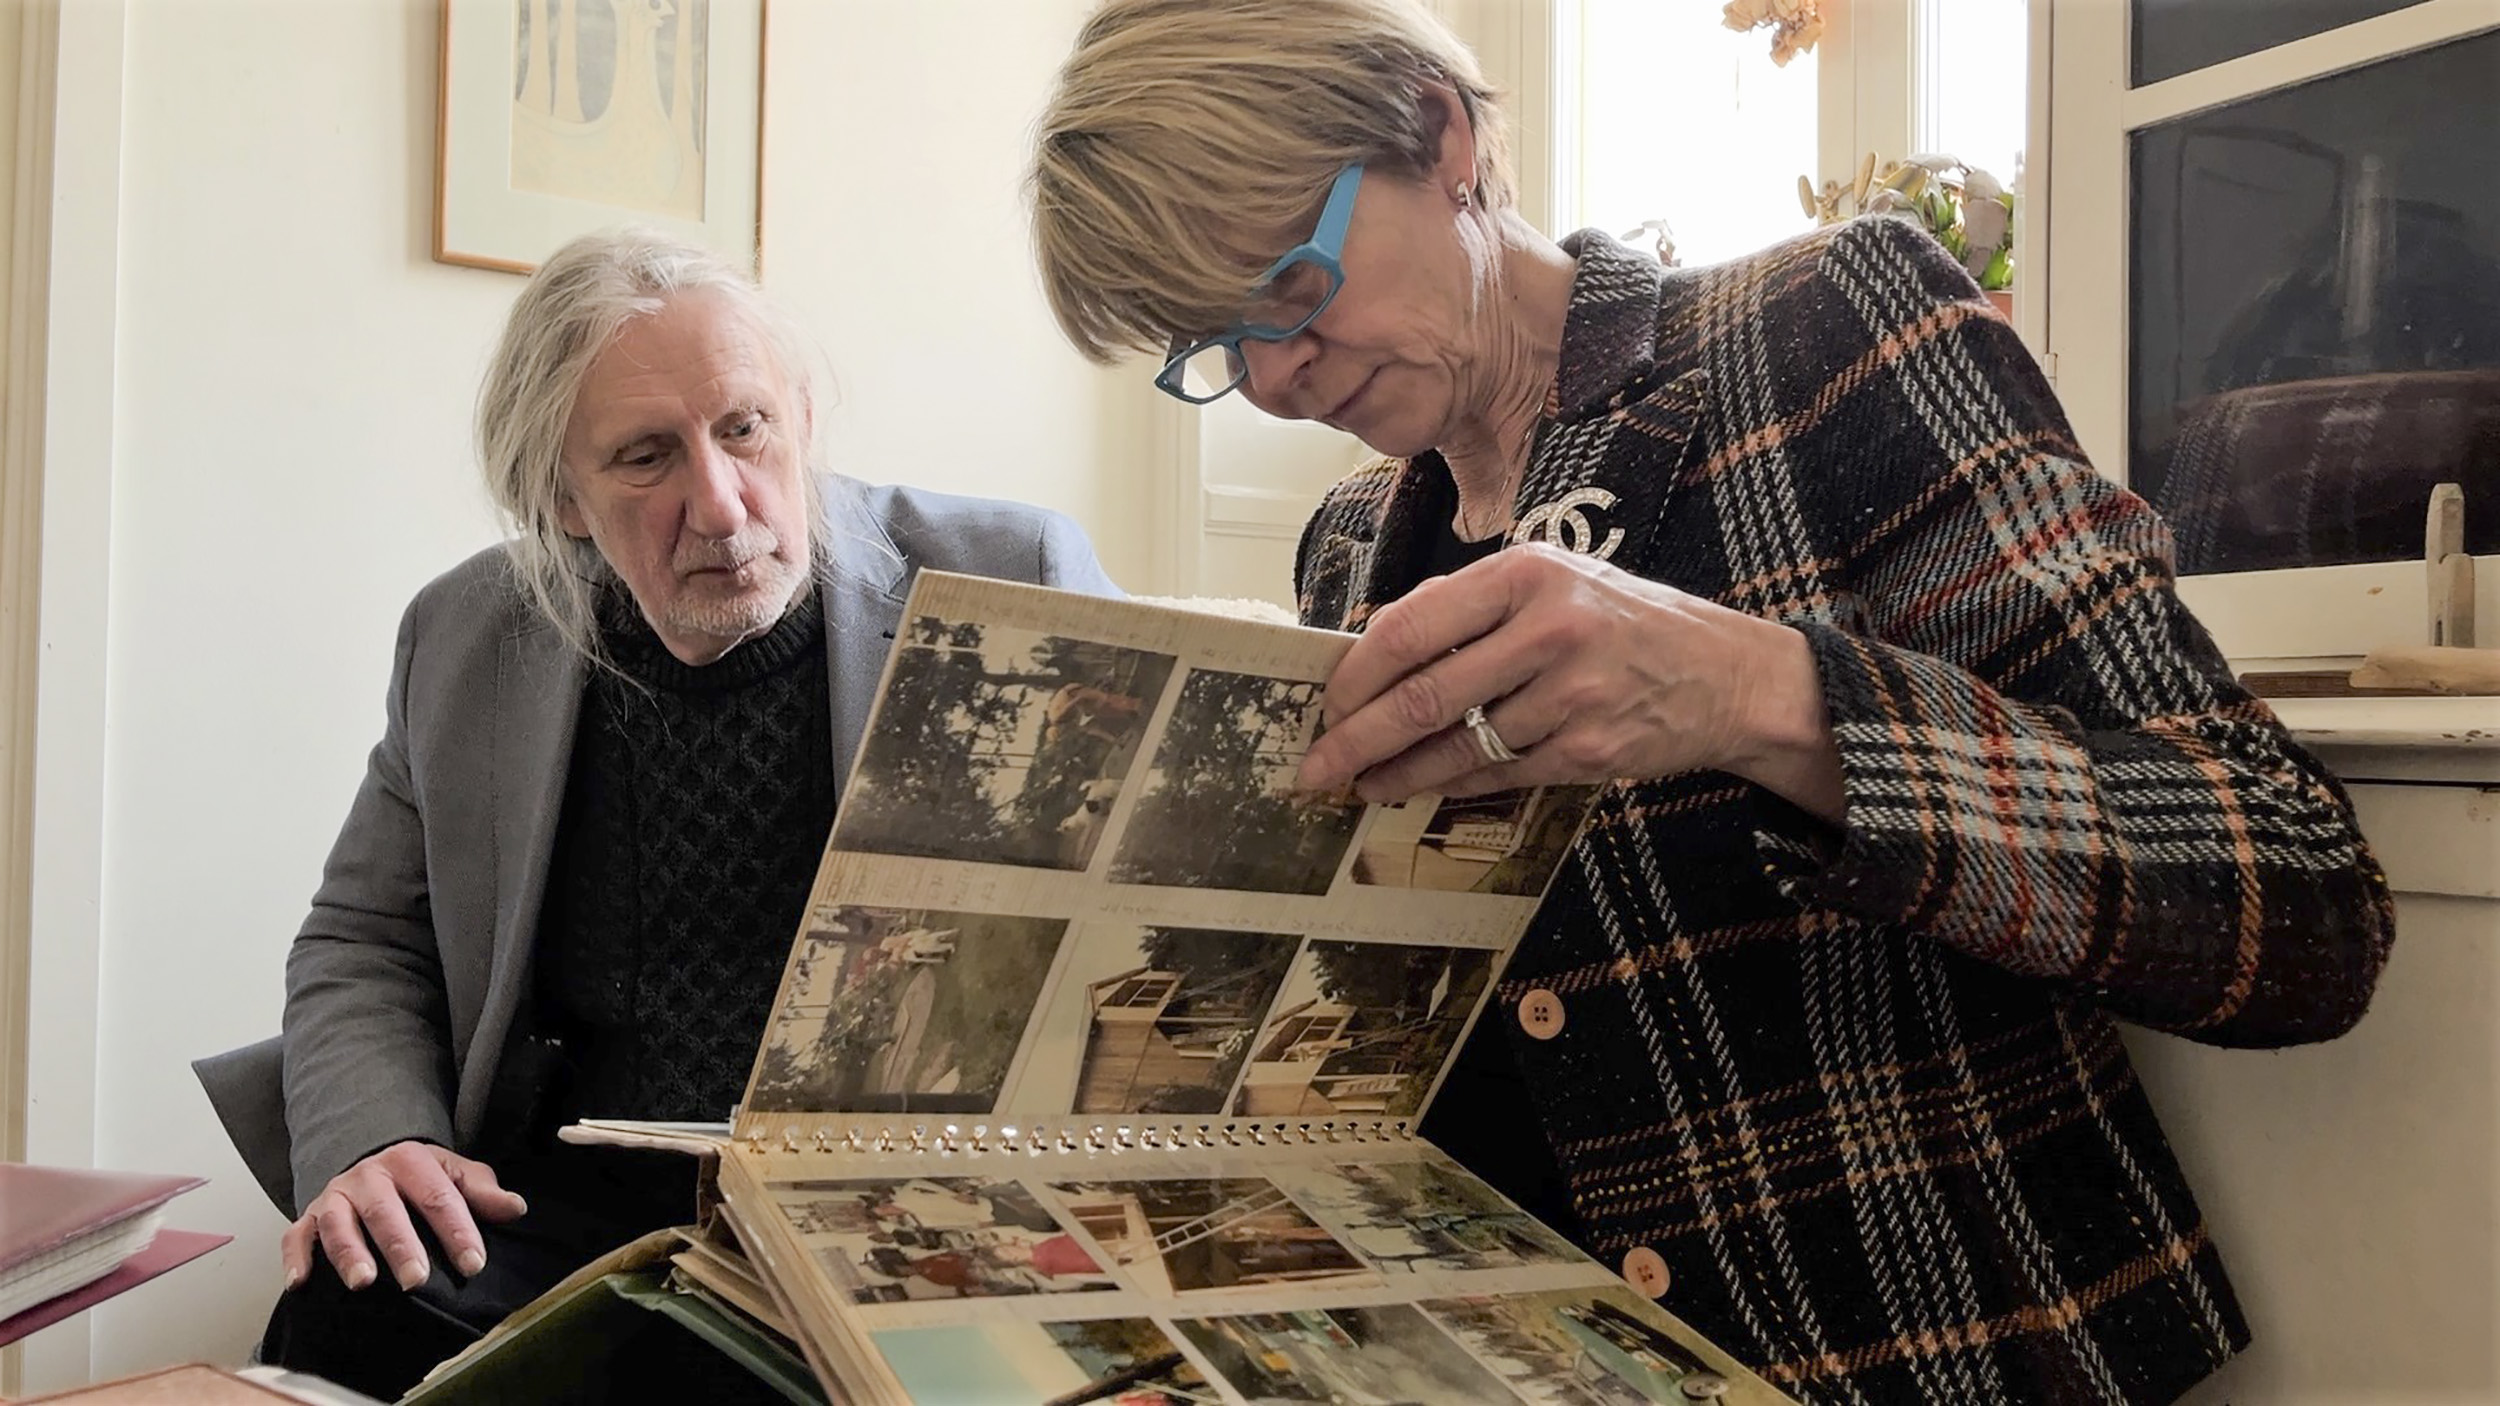 Kjell Sundstedt and his cousin Karina Sjöberg with a photo album of their family, who were institutionalized and sterilized in Sweden.